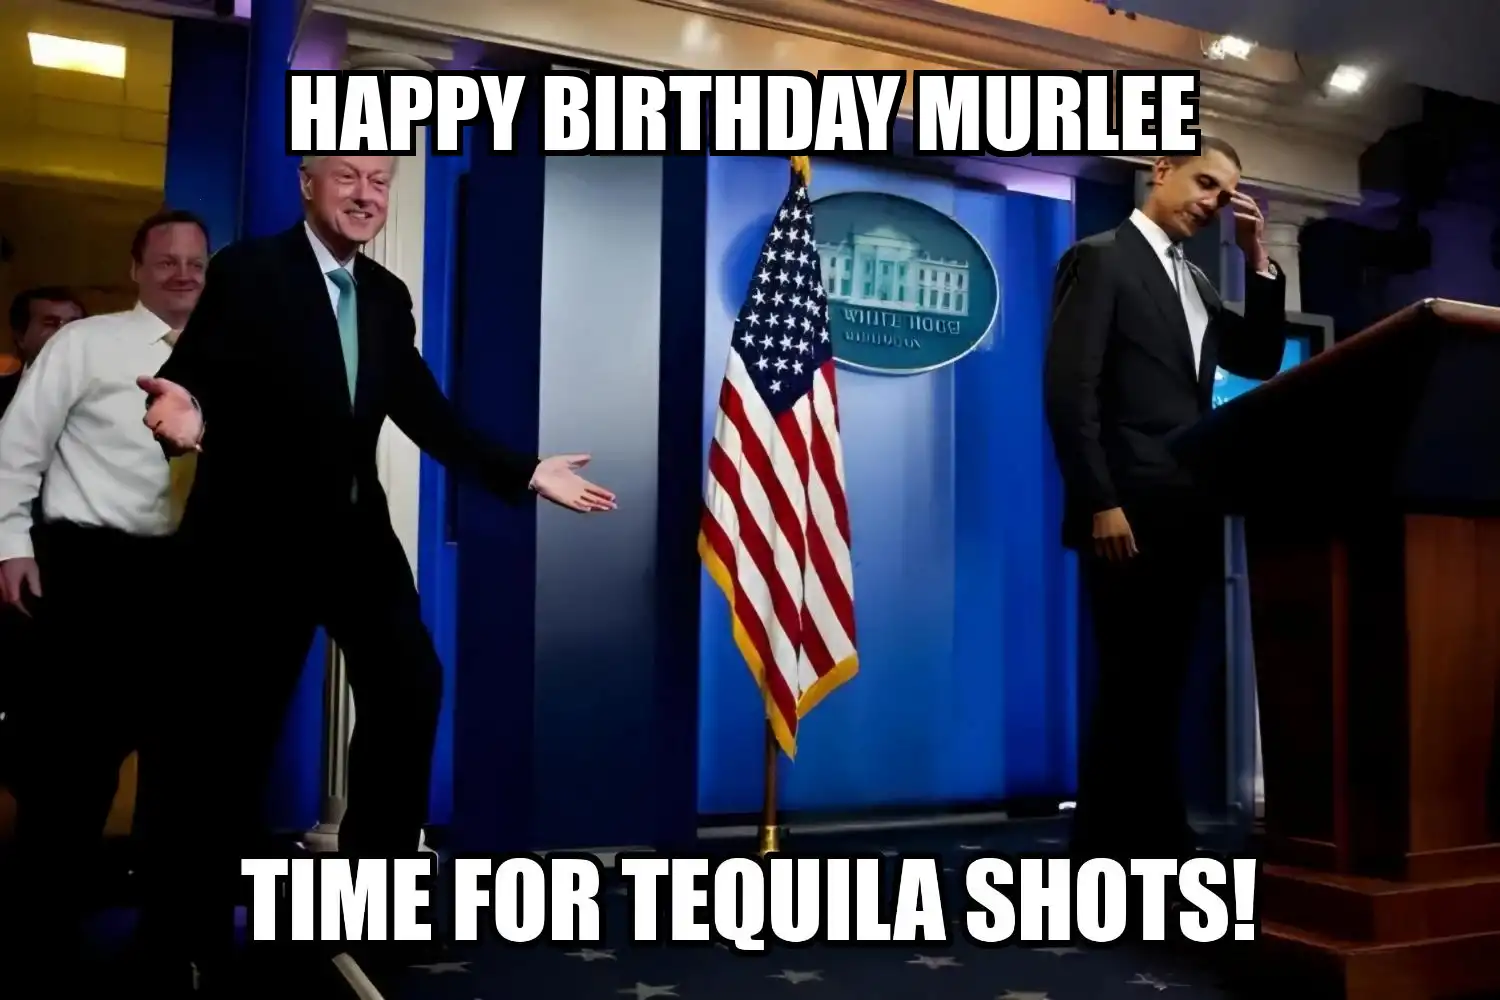 Happy Birthday Murlee Time For Tequila Shots Memes